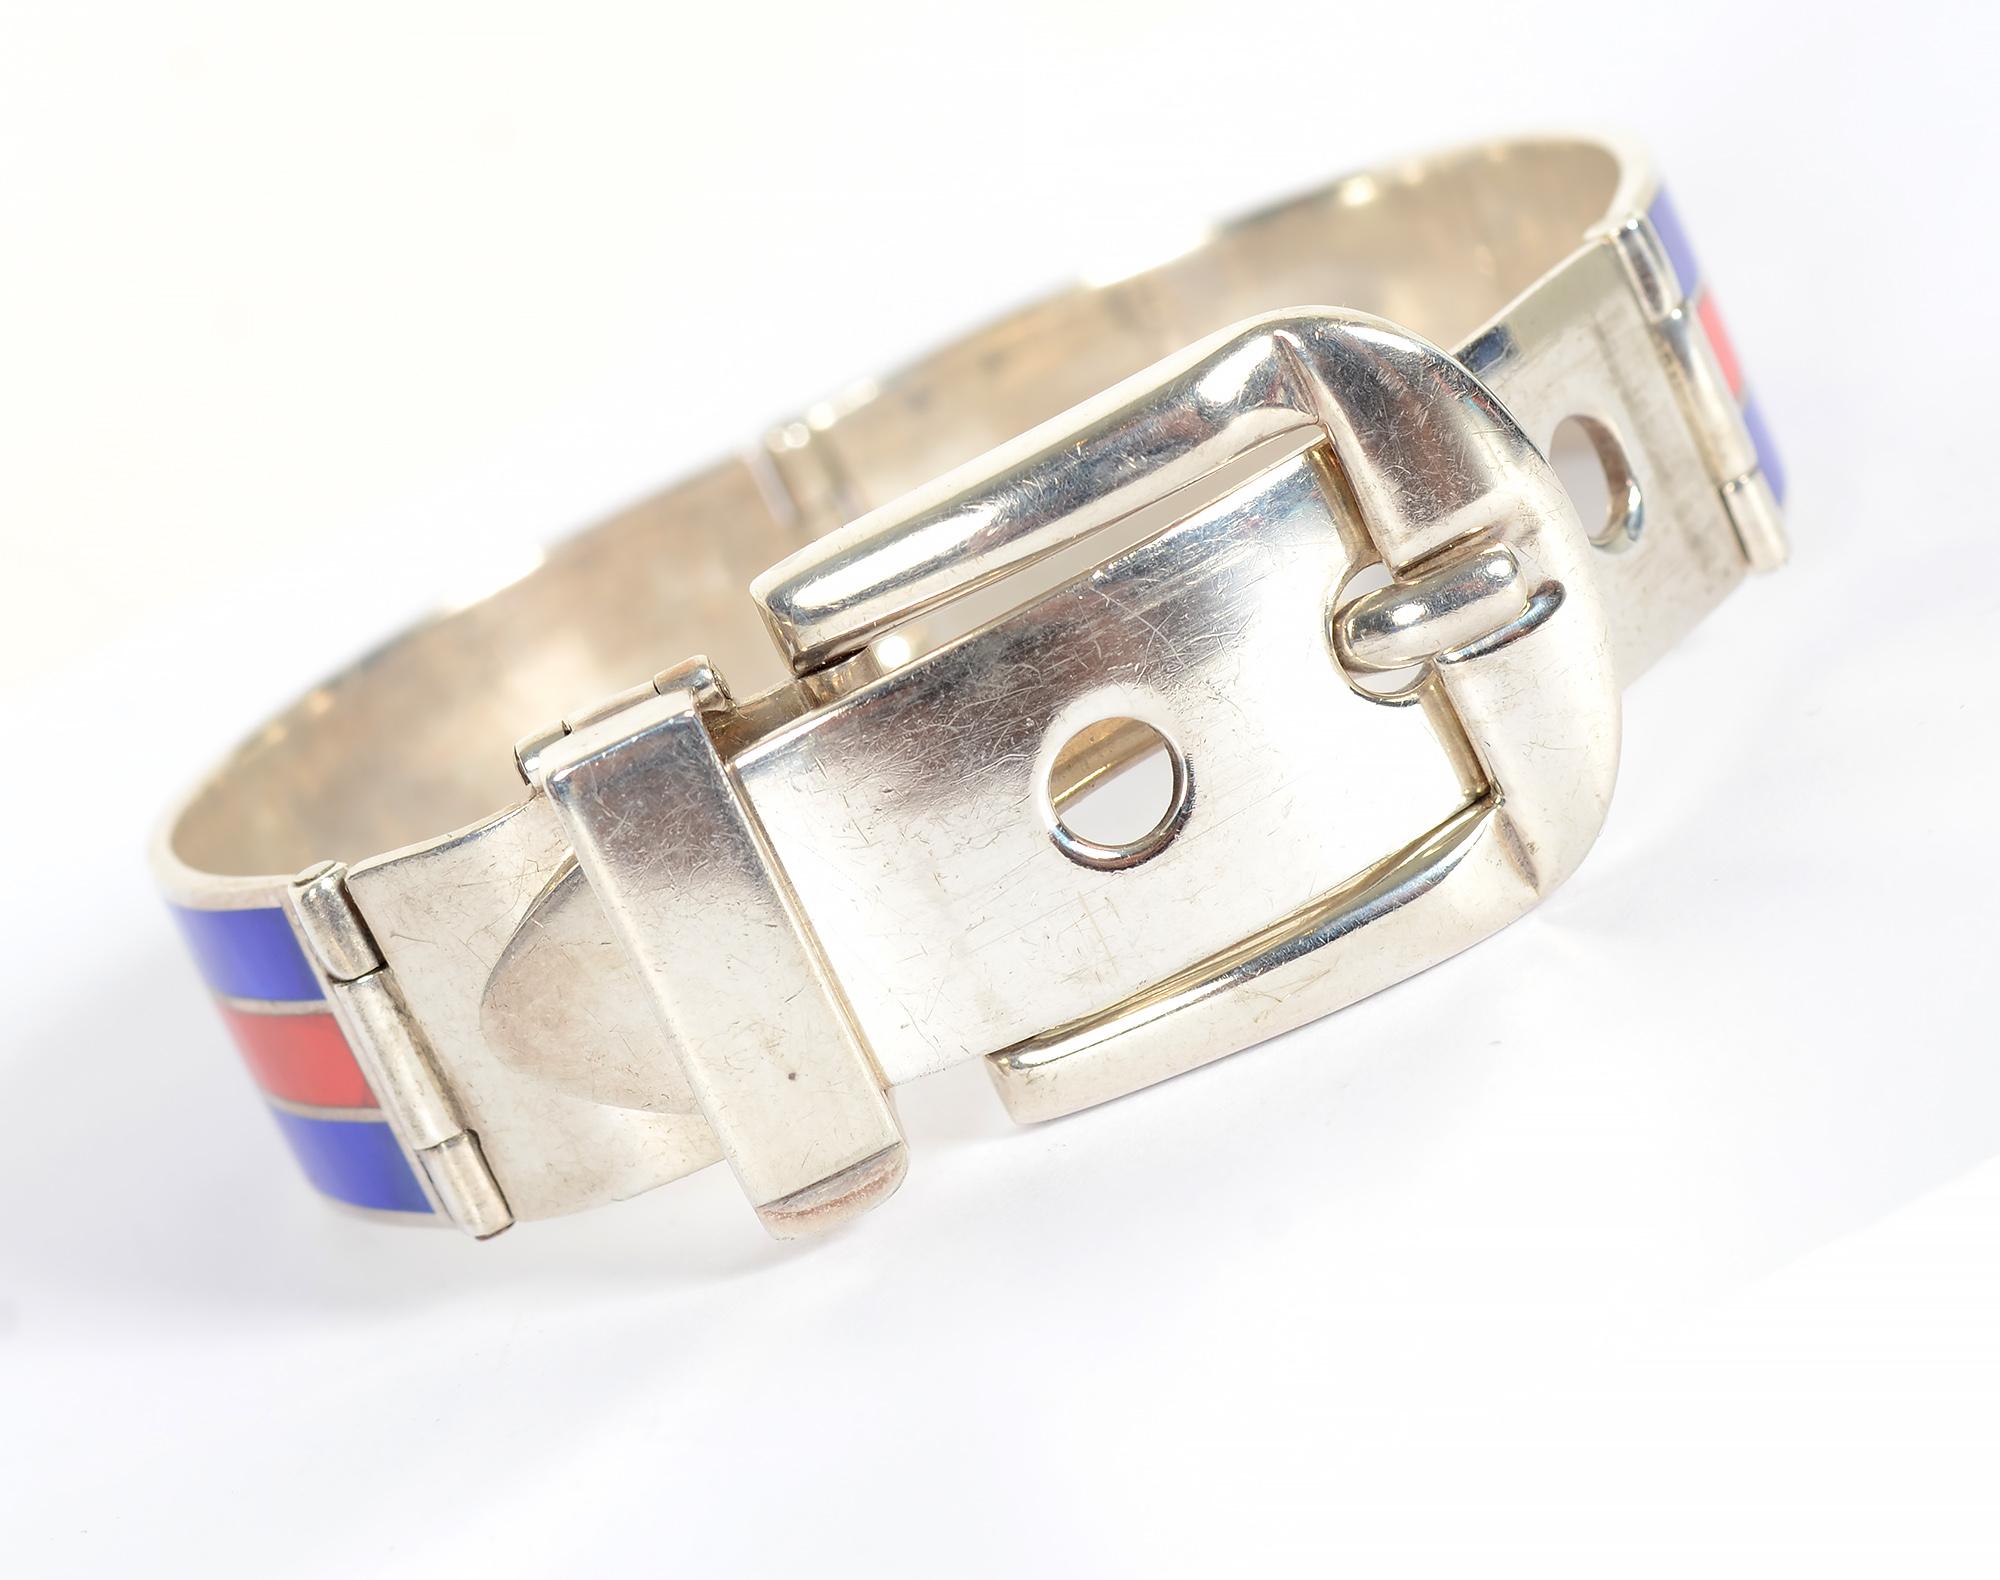 Classic Gucci enamel buckle bracelet on sterling silver done in the perfect colors of red and blue. The bracelet has 3 holes so it can be adjusted to an oval inside diameter of 2 5/16